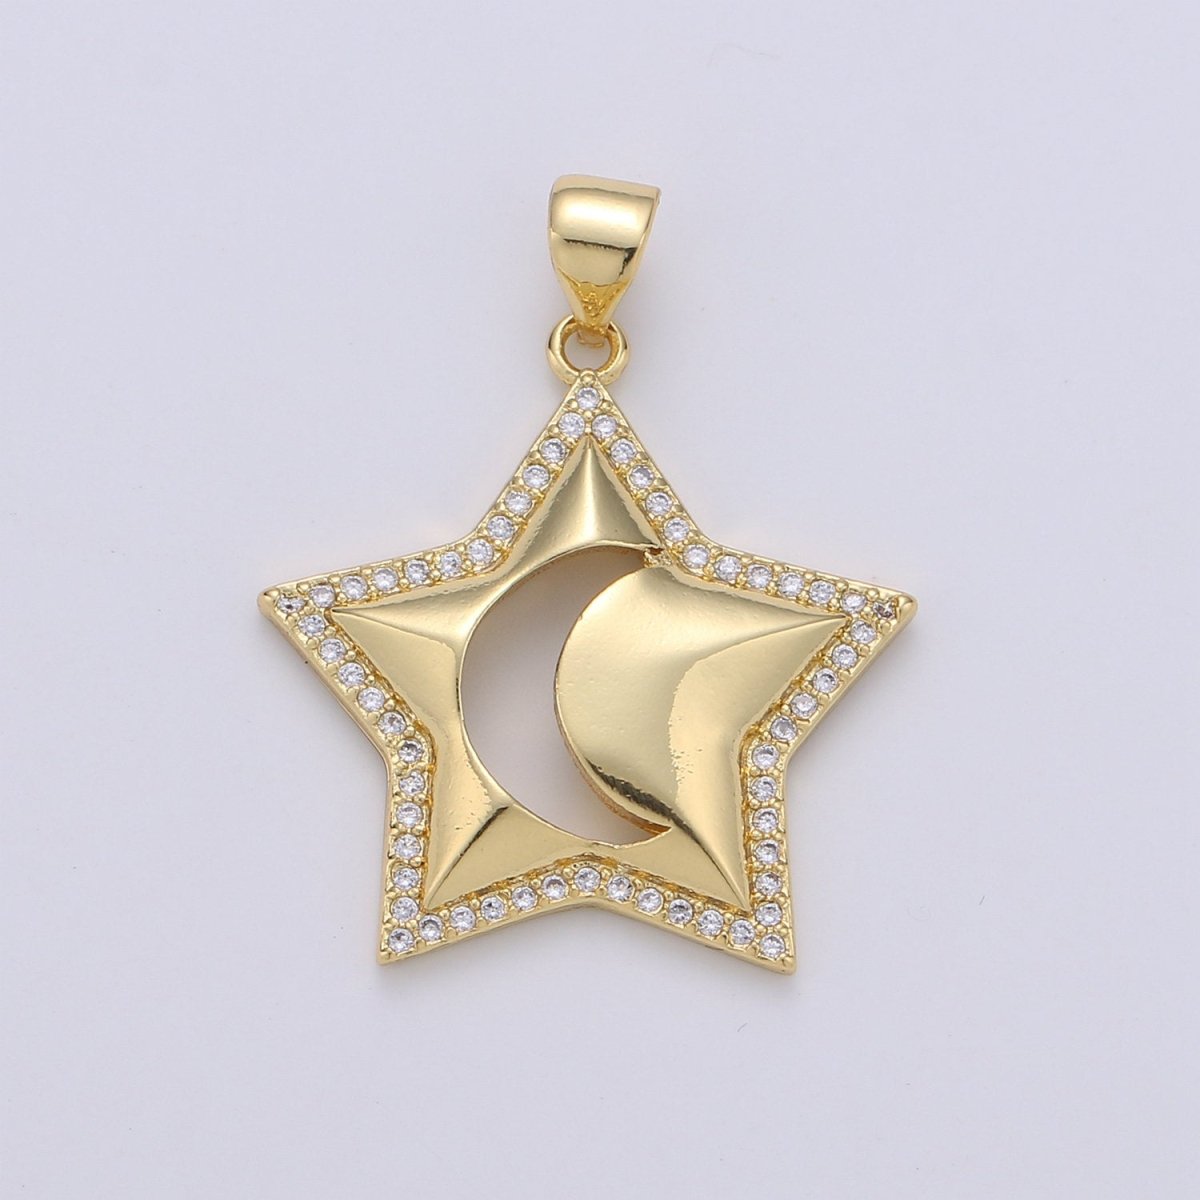 24k Gold Filled Micro Pave CZ Star Pendant Charm, Crescent moon Pendant Charm, Gold Filled Celestial Pendant, For DIY Jewelry Making I-725 - DLUXCA